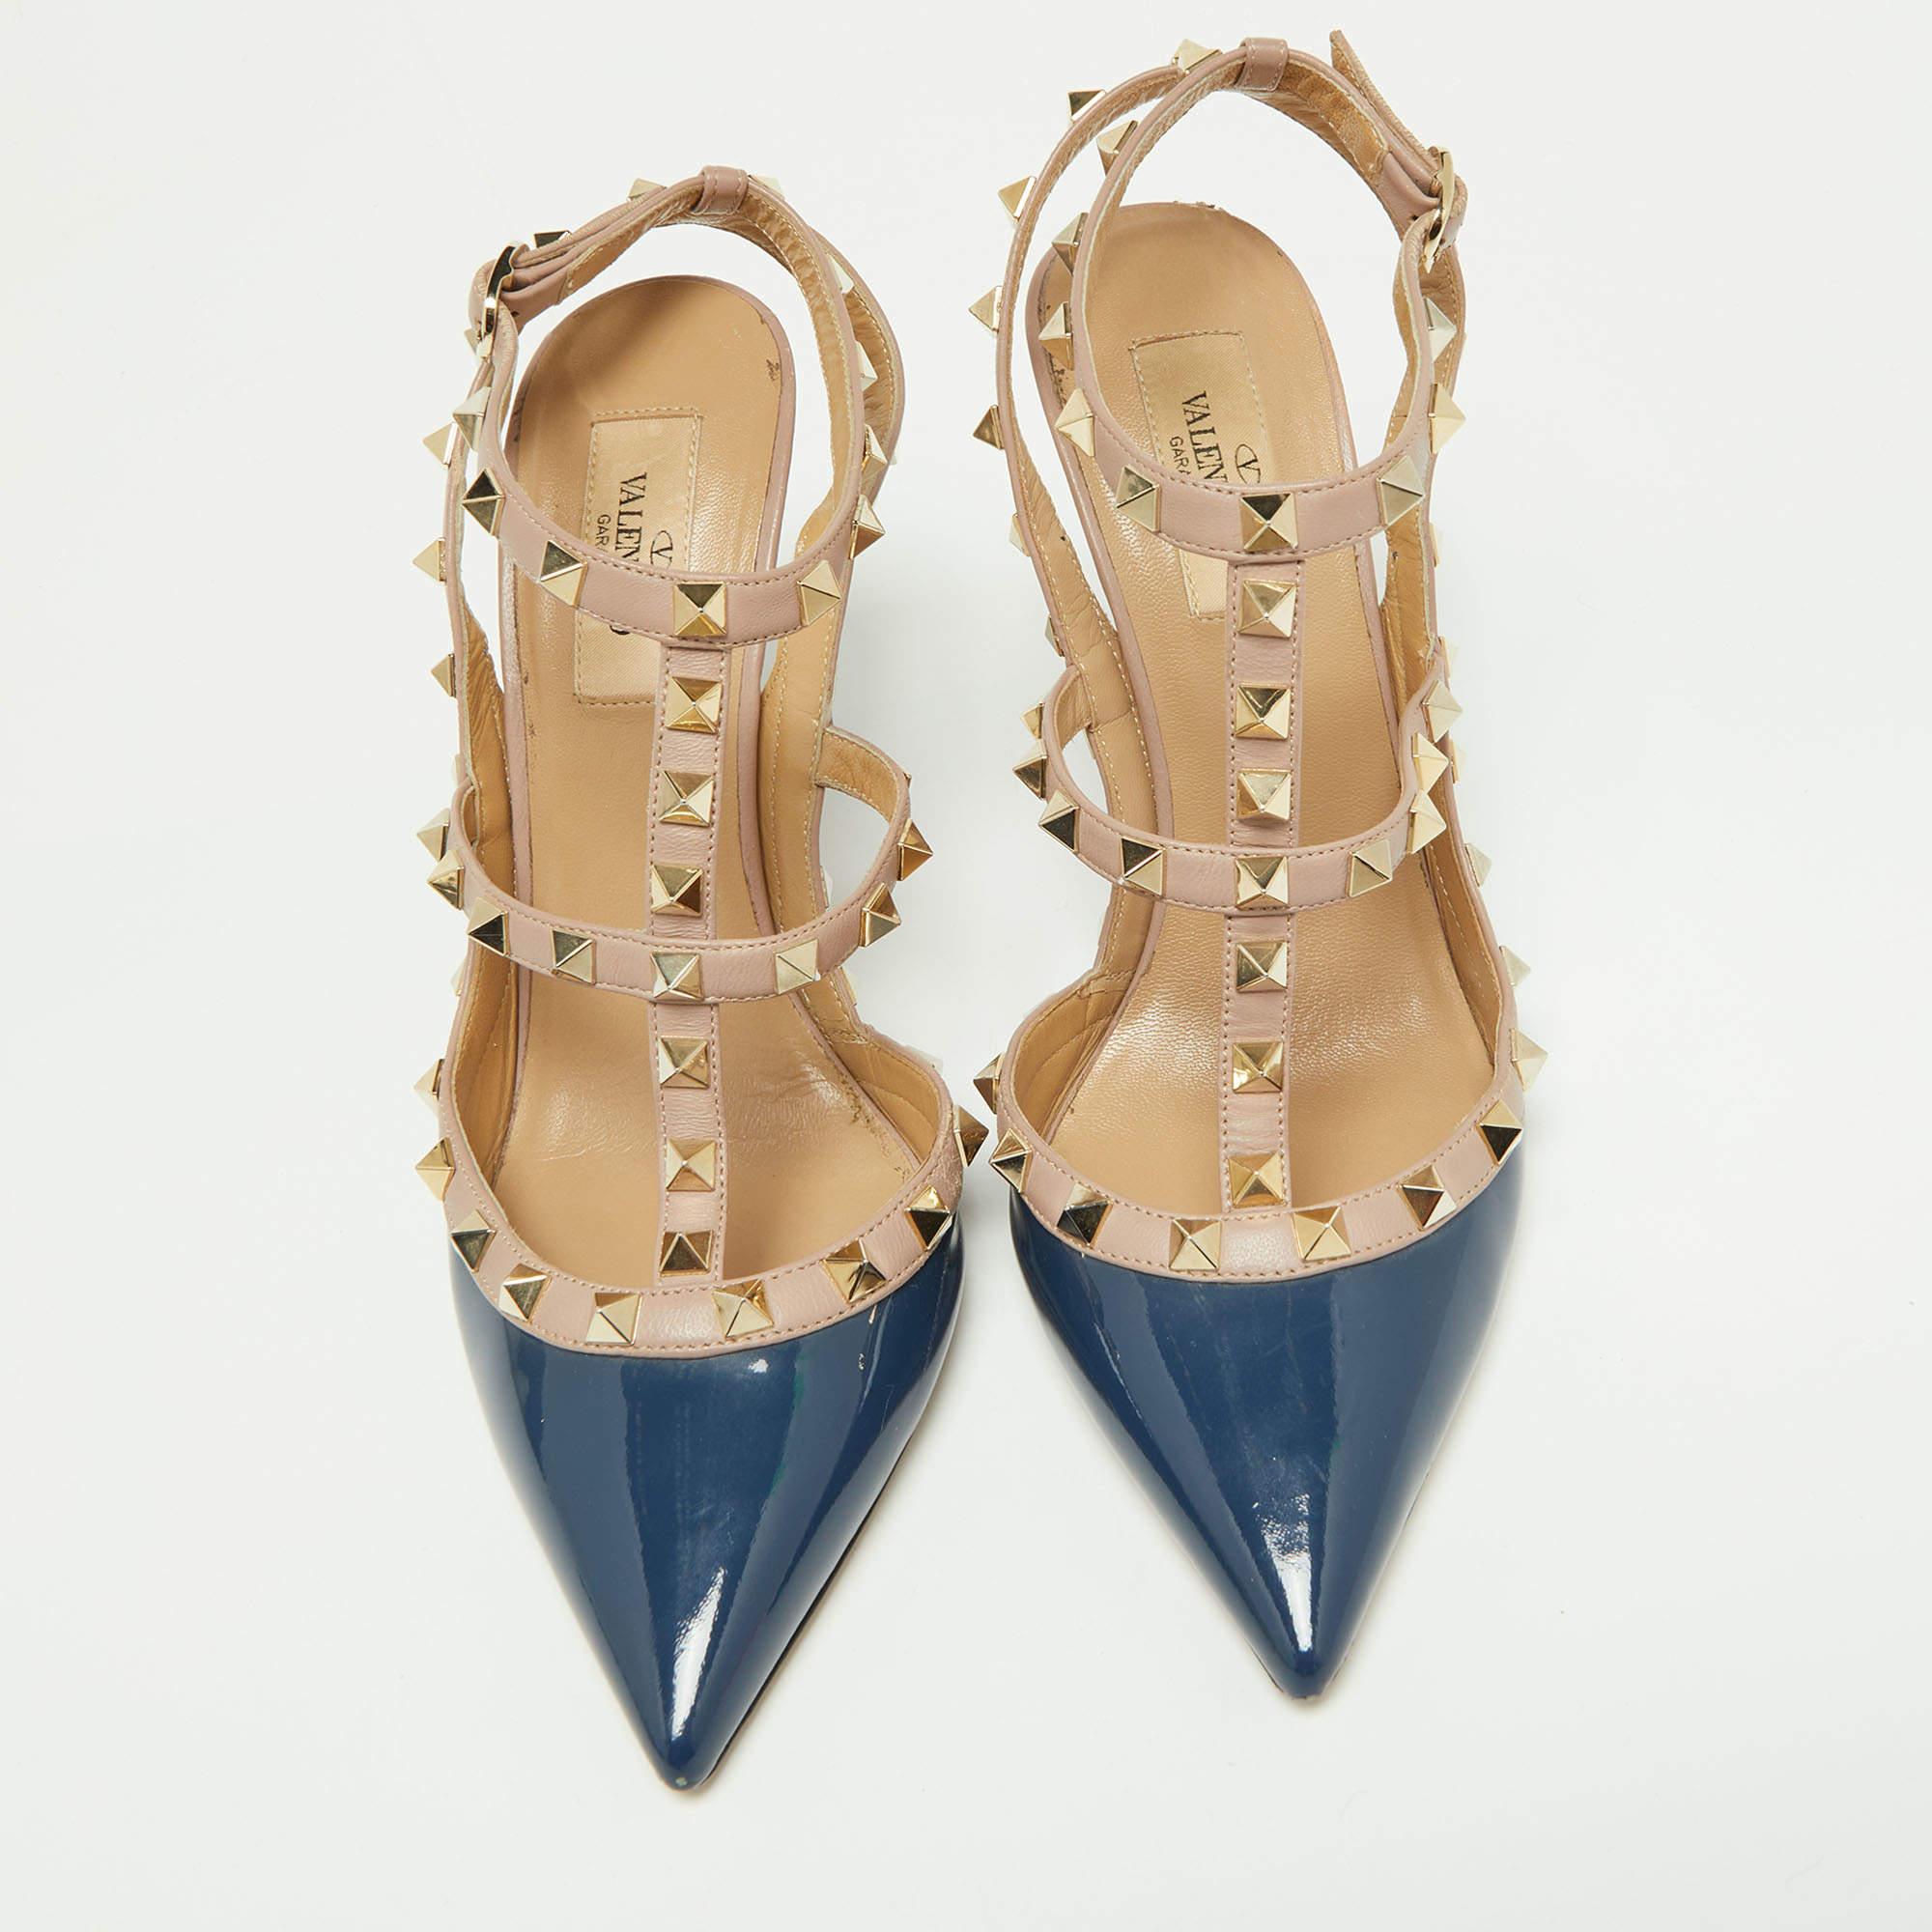 Instantly recognisable, the Rockstud sandals from Valentino are one of the most iconic styles from the brand. These sandals have been crafted from blue & pink leather & patent leather and styled with the signature Rockstud accents on the straps.